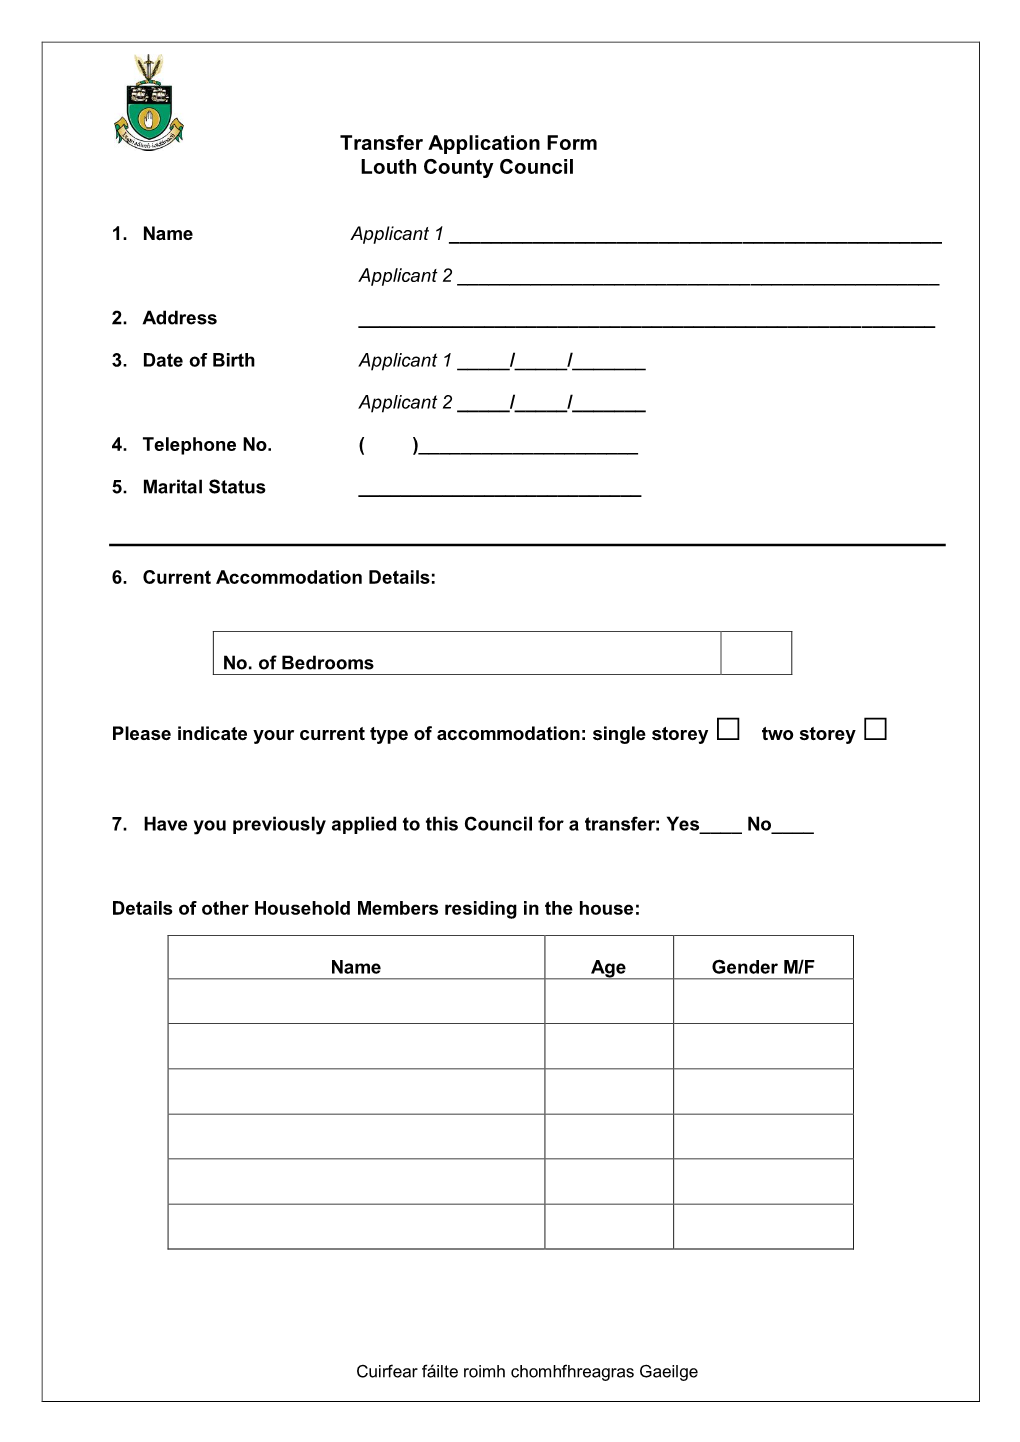 Transfer Application Form Louth County Council